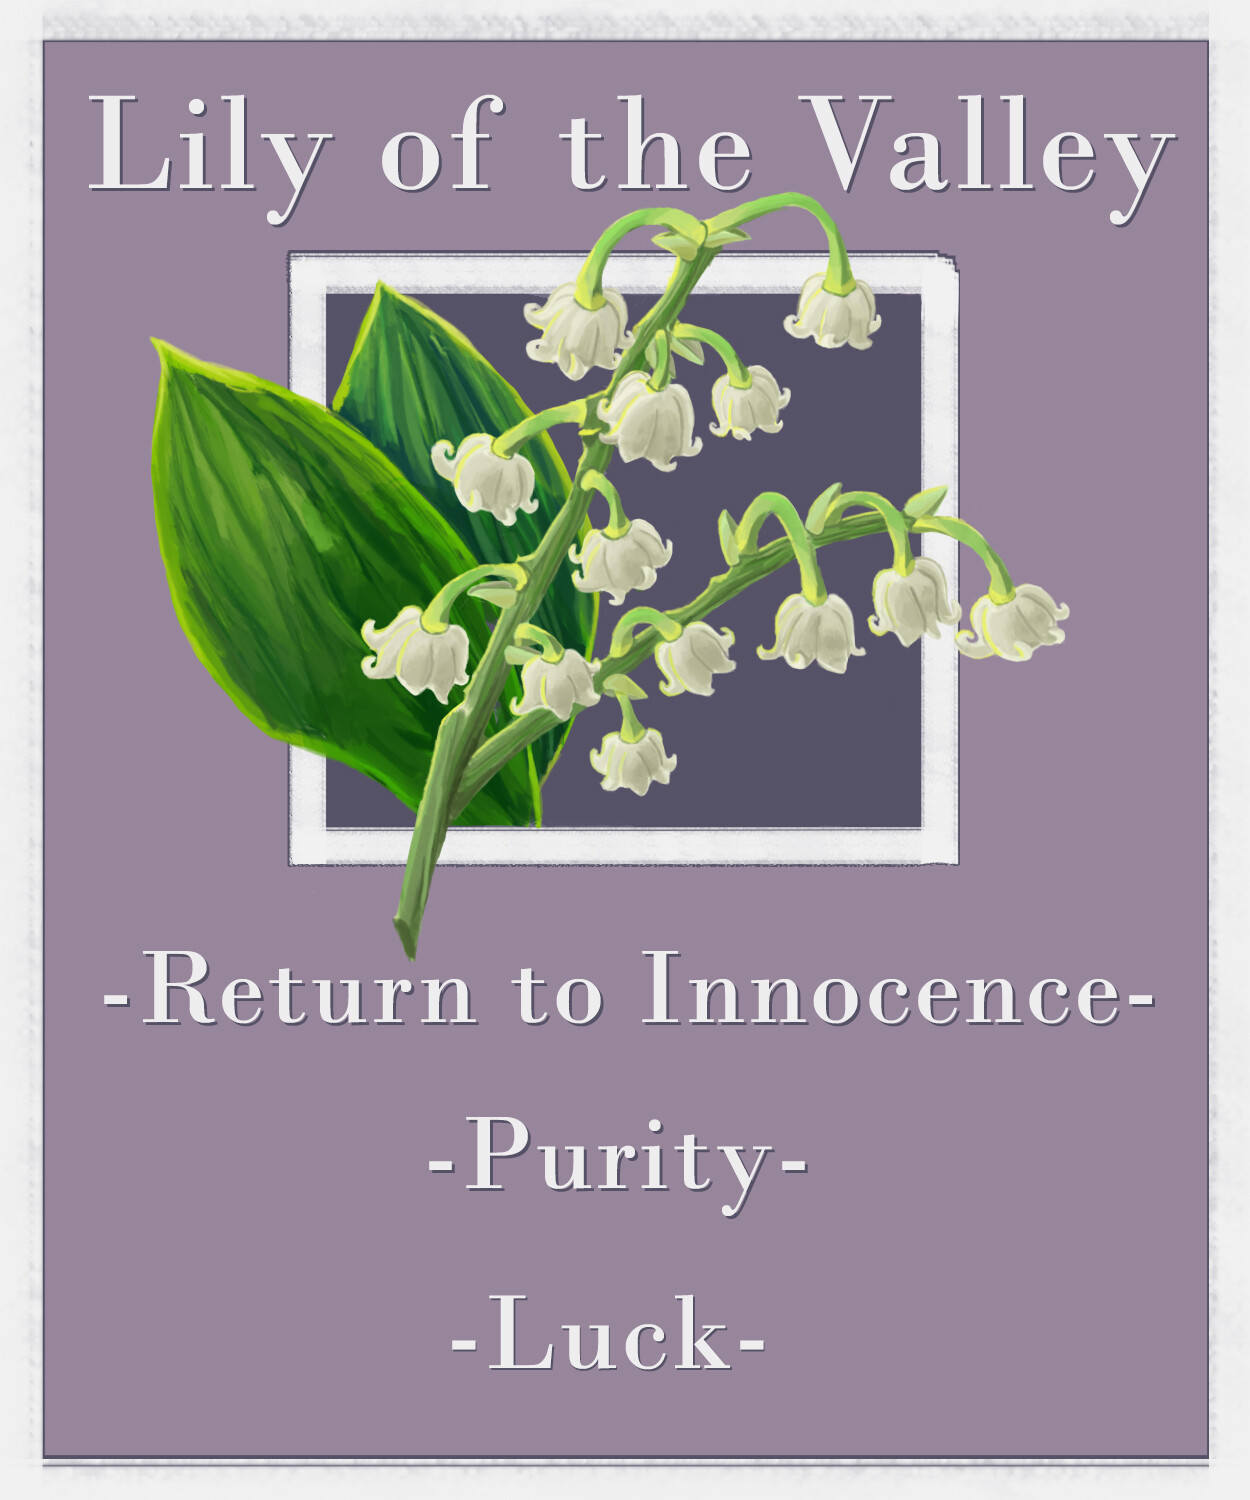 ArtStation - Lily of the Valley Infographic